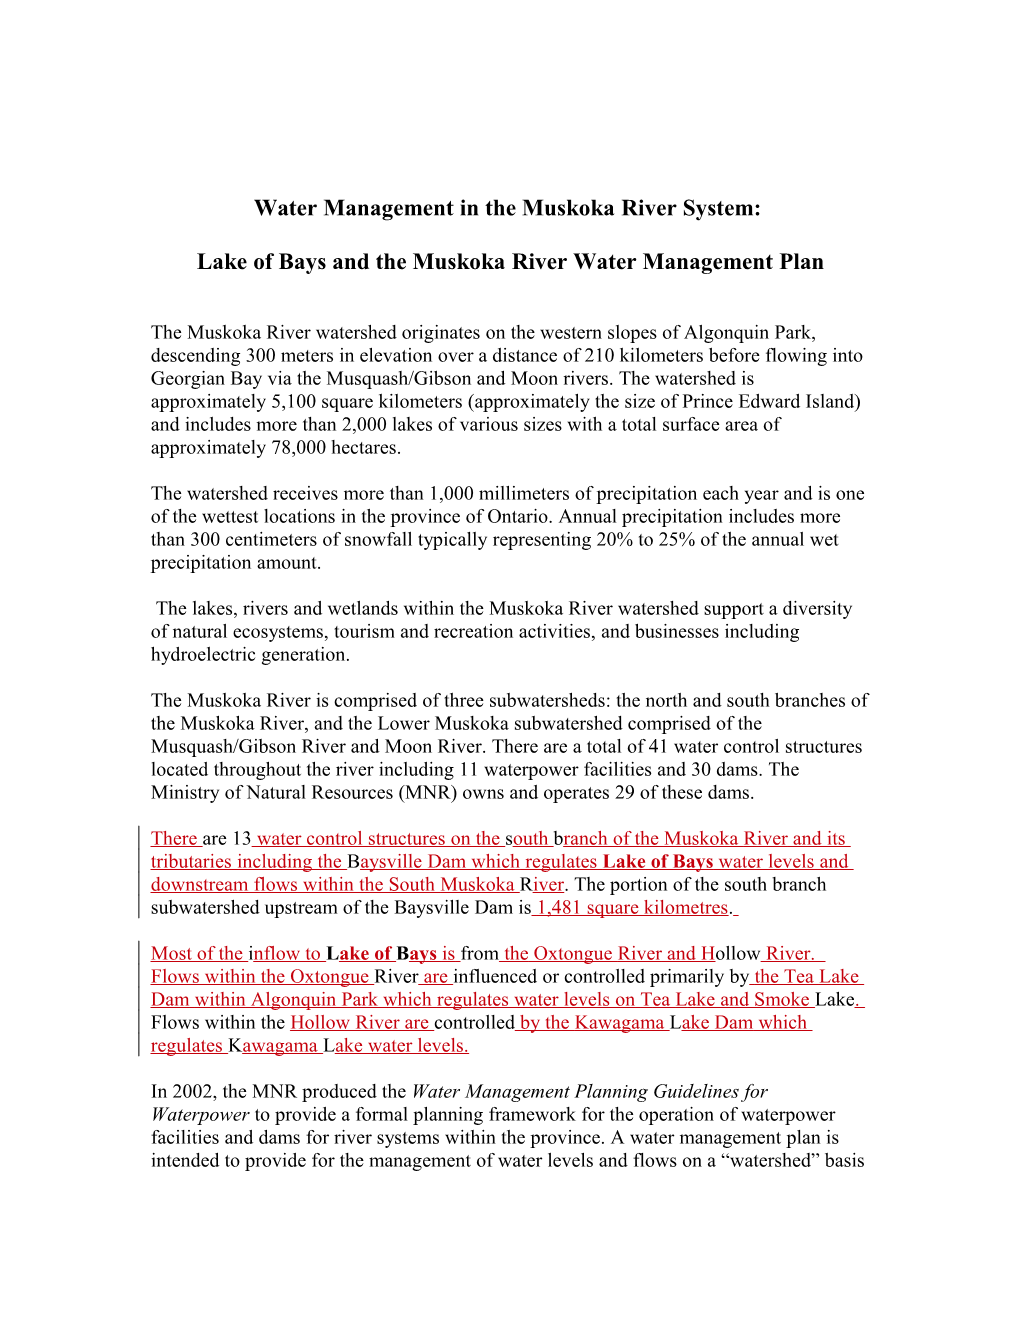 Water Management in the Muskoka River System